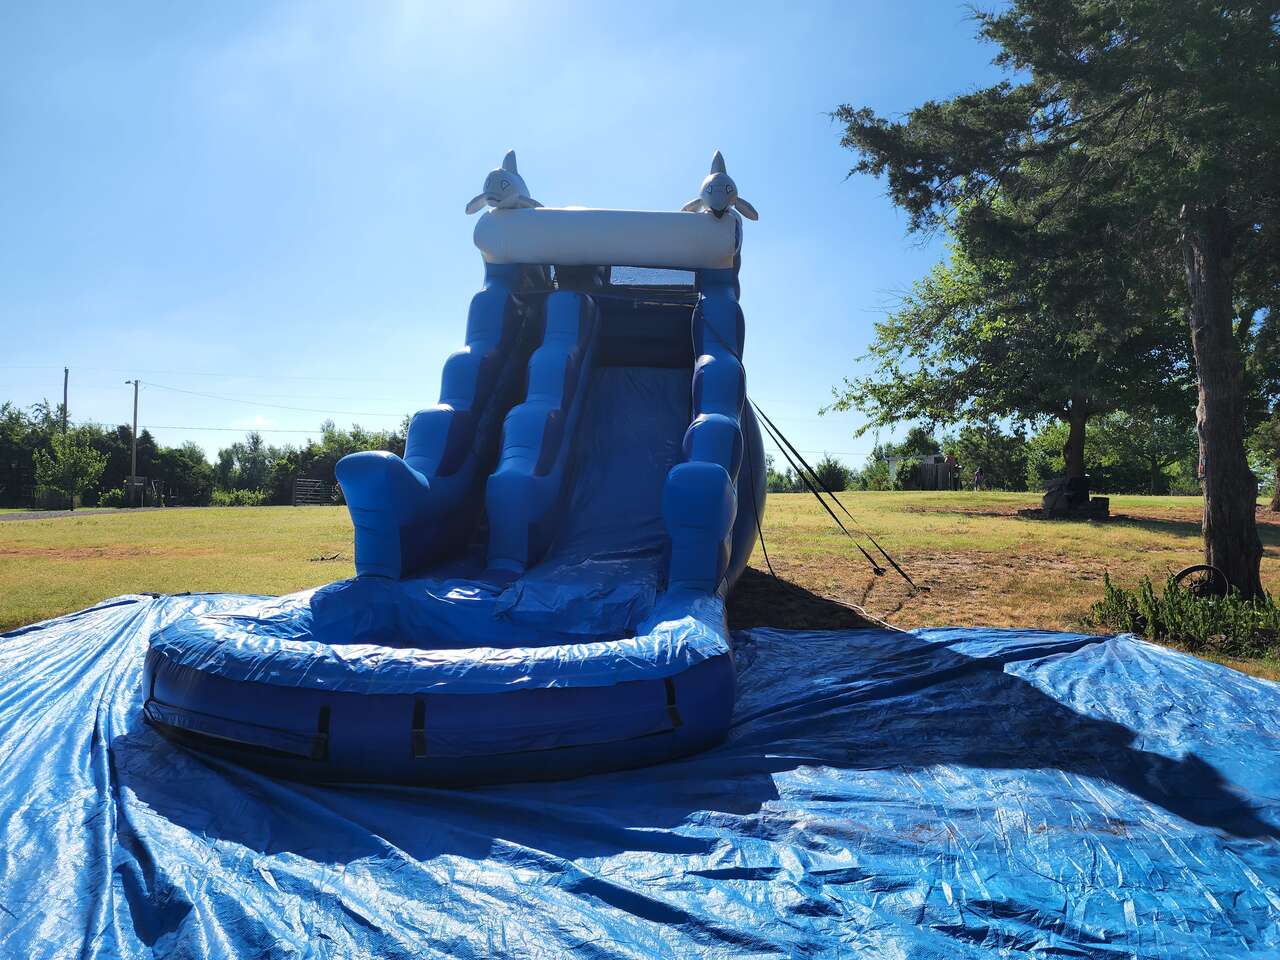 Exciting Options for Water Slide Rentals in Yukon